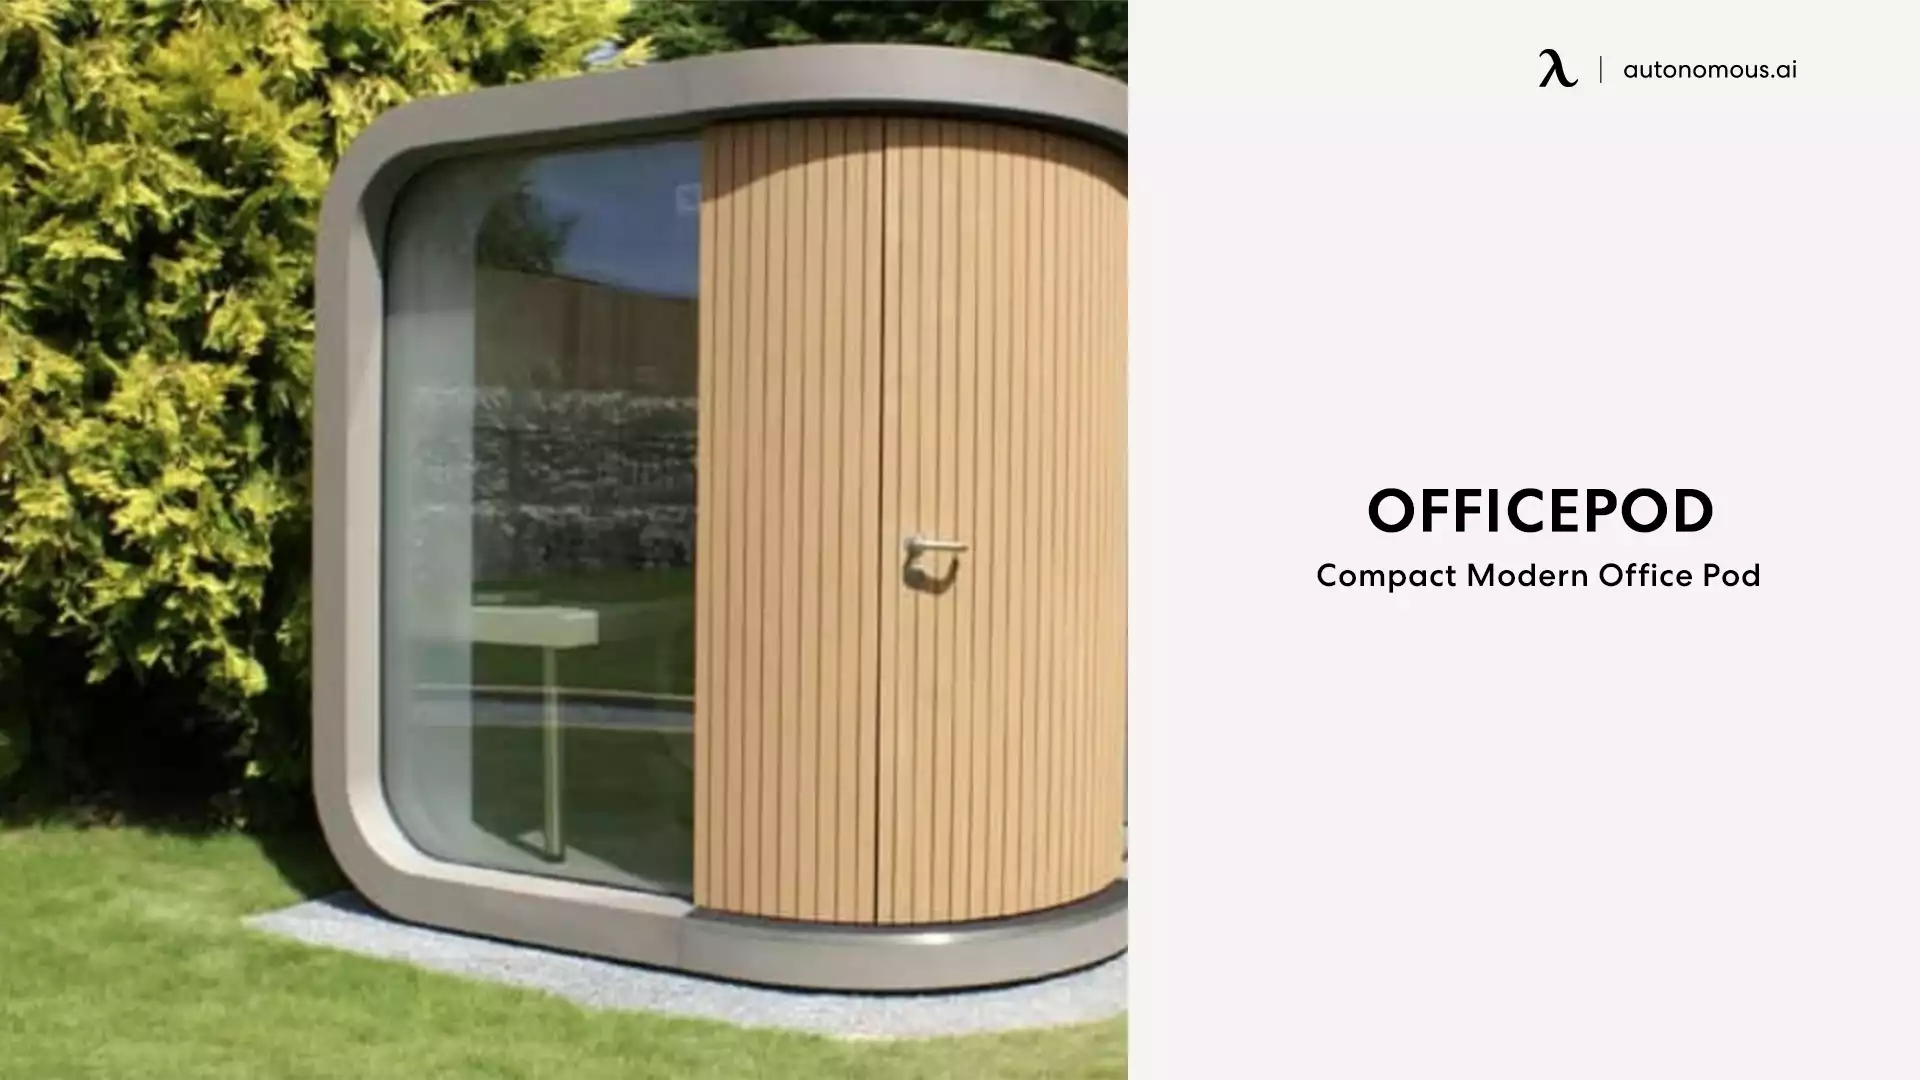 The OfficePOD outdoor office pod